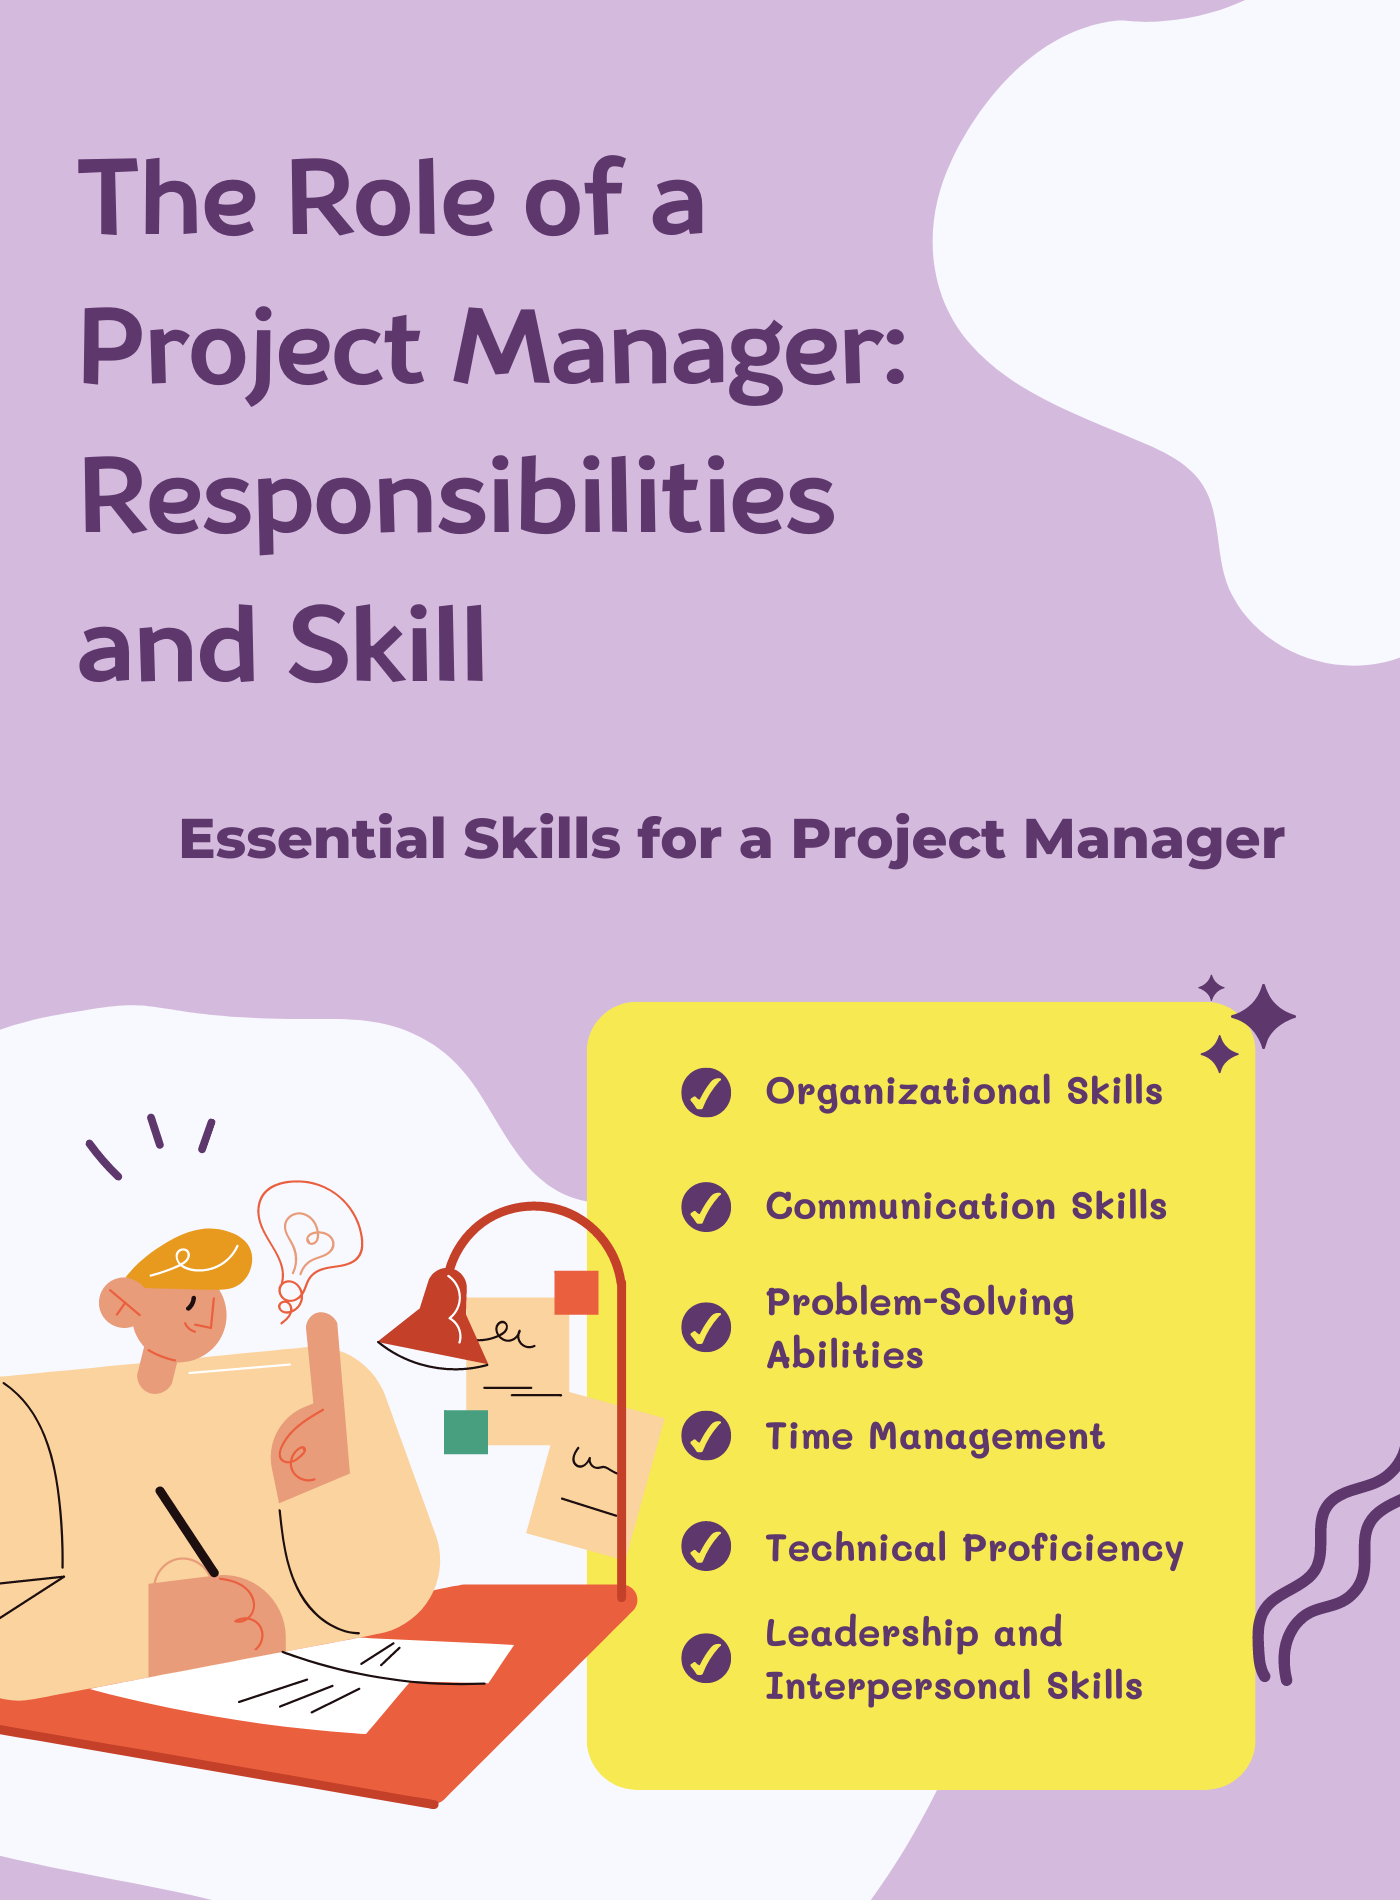 The Role of a Project Manager: Responsibilities and Skills